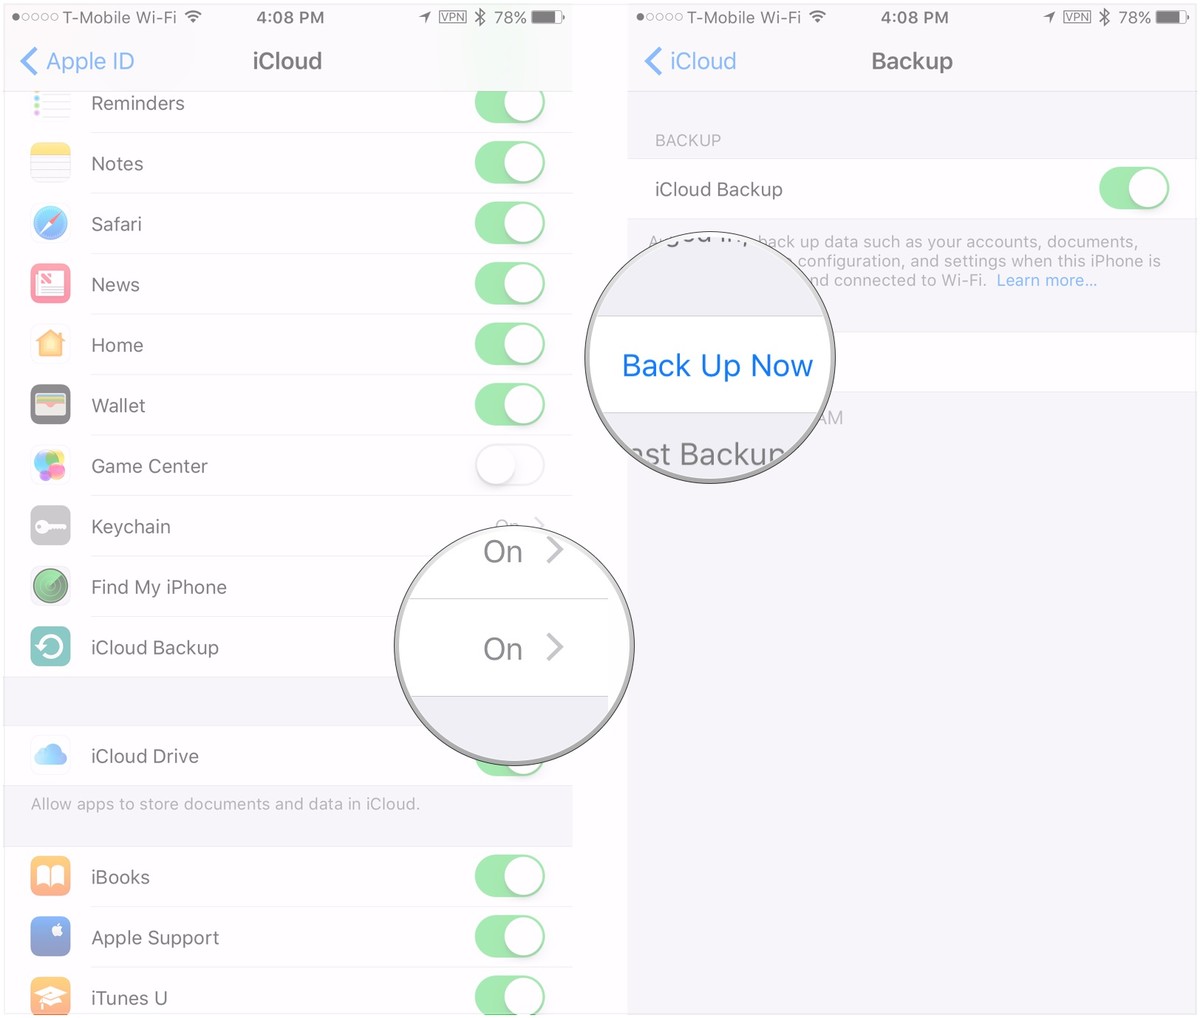 Tap iCloud backup, then tap Back Up Now